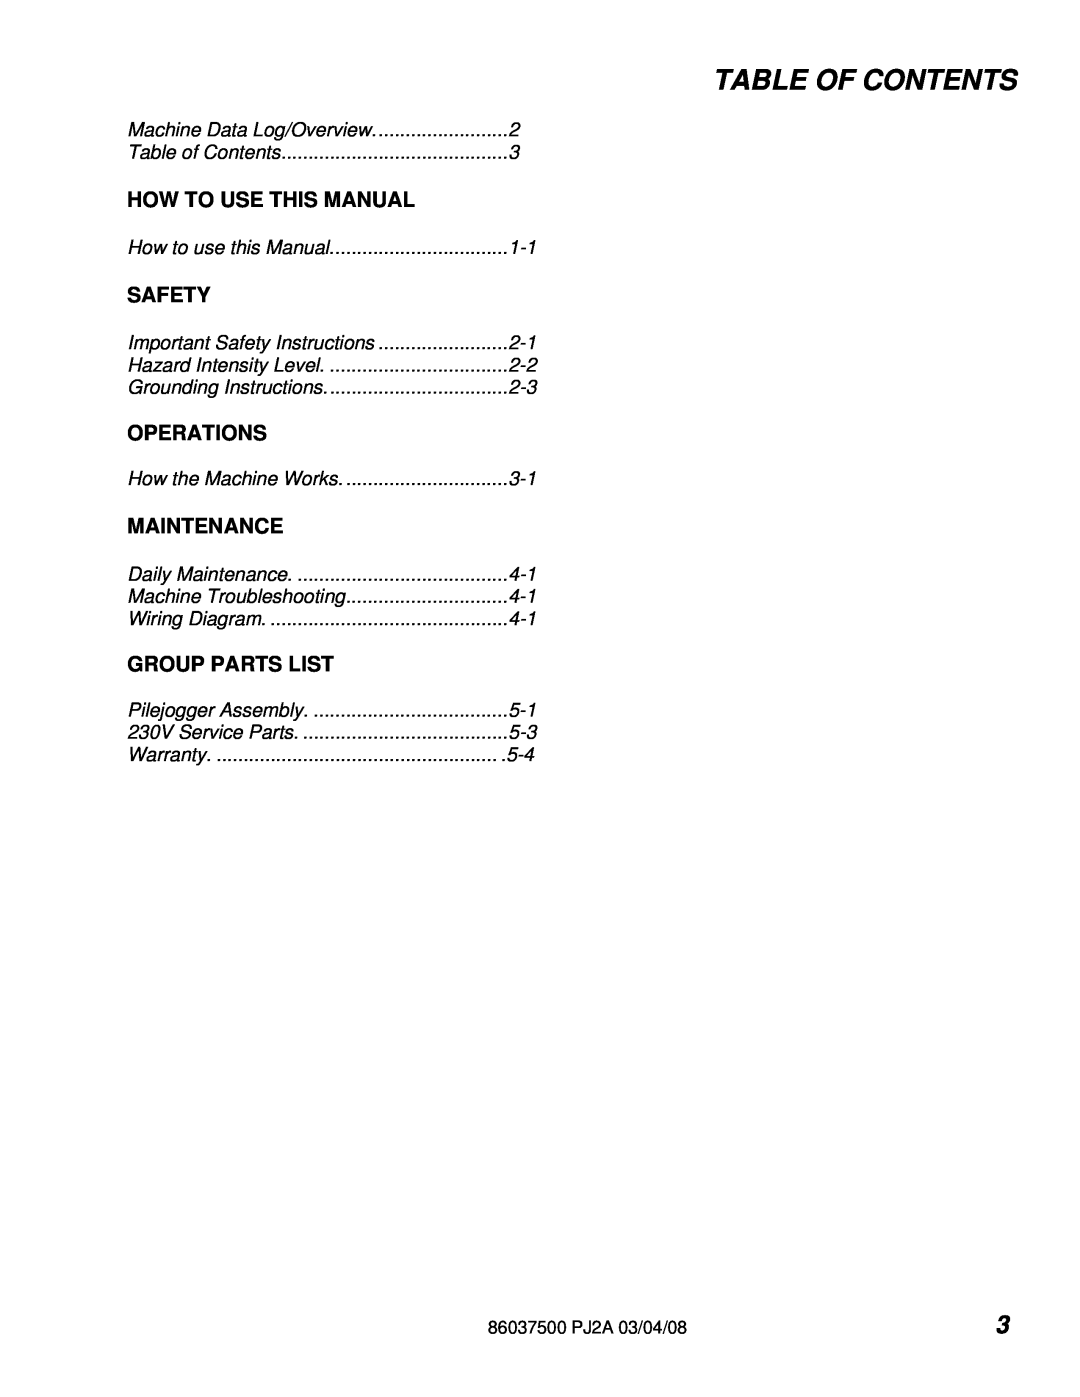 Windsor PJ2AIE Table Of Contents, How To Use This Manual, Safety, Operations, Maintenance, Group Parts List 